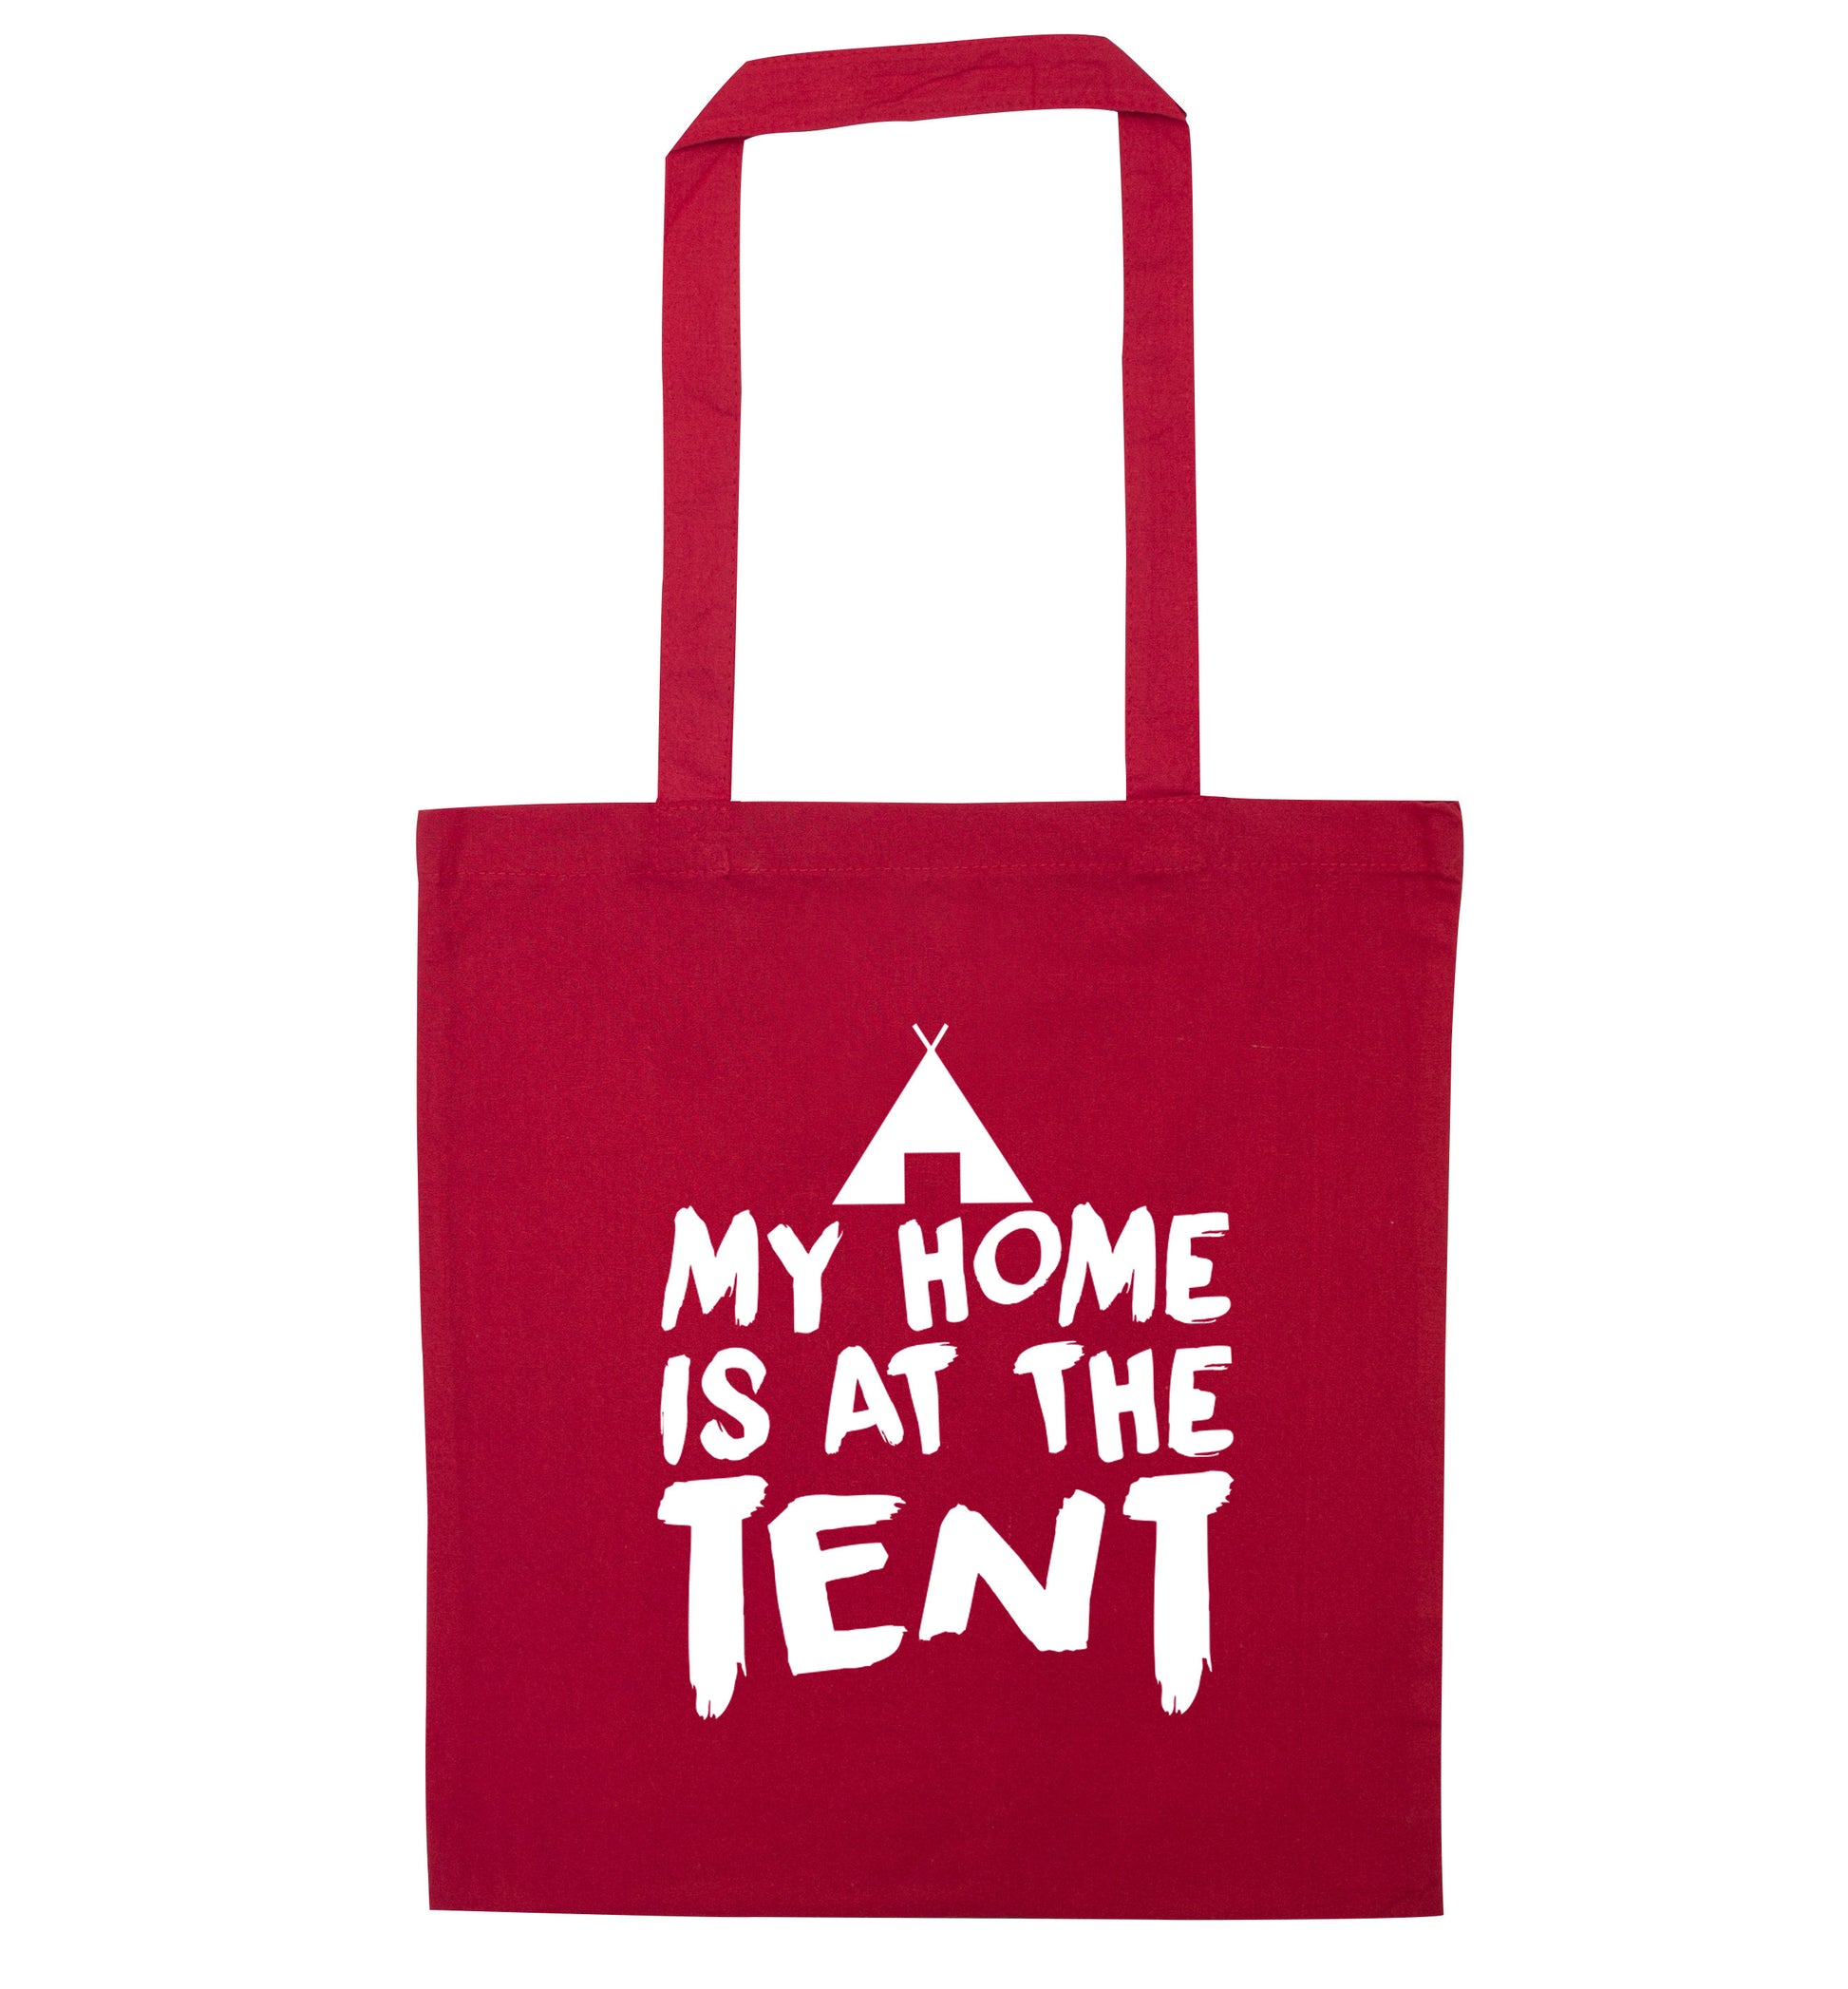 My home is at the tent red tote bag